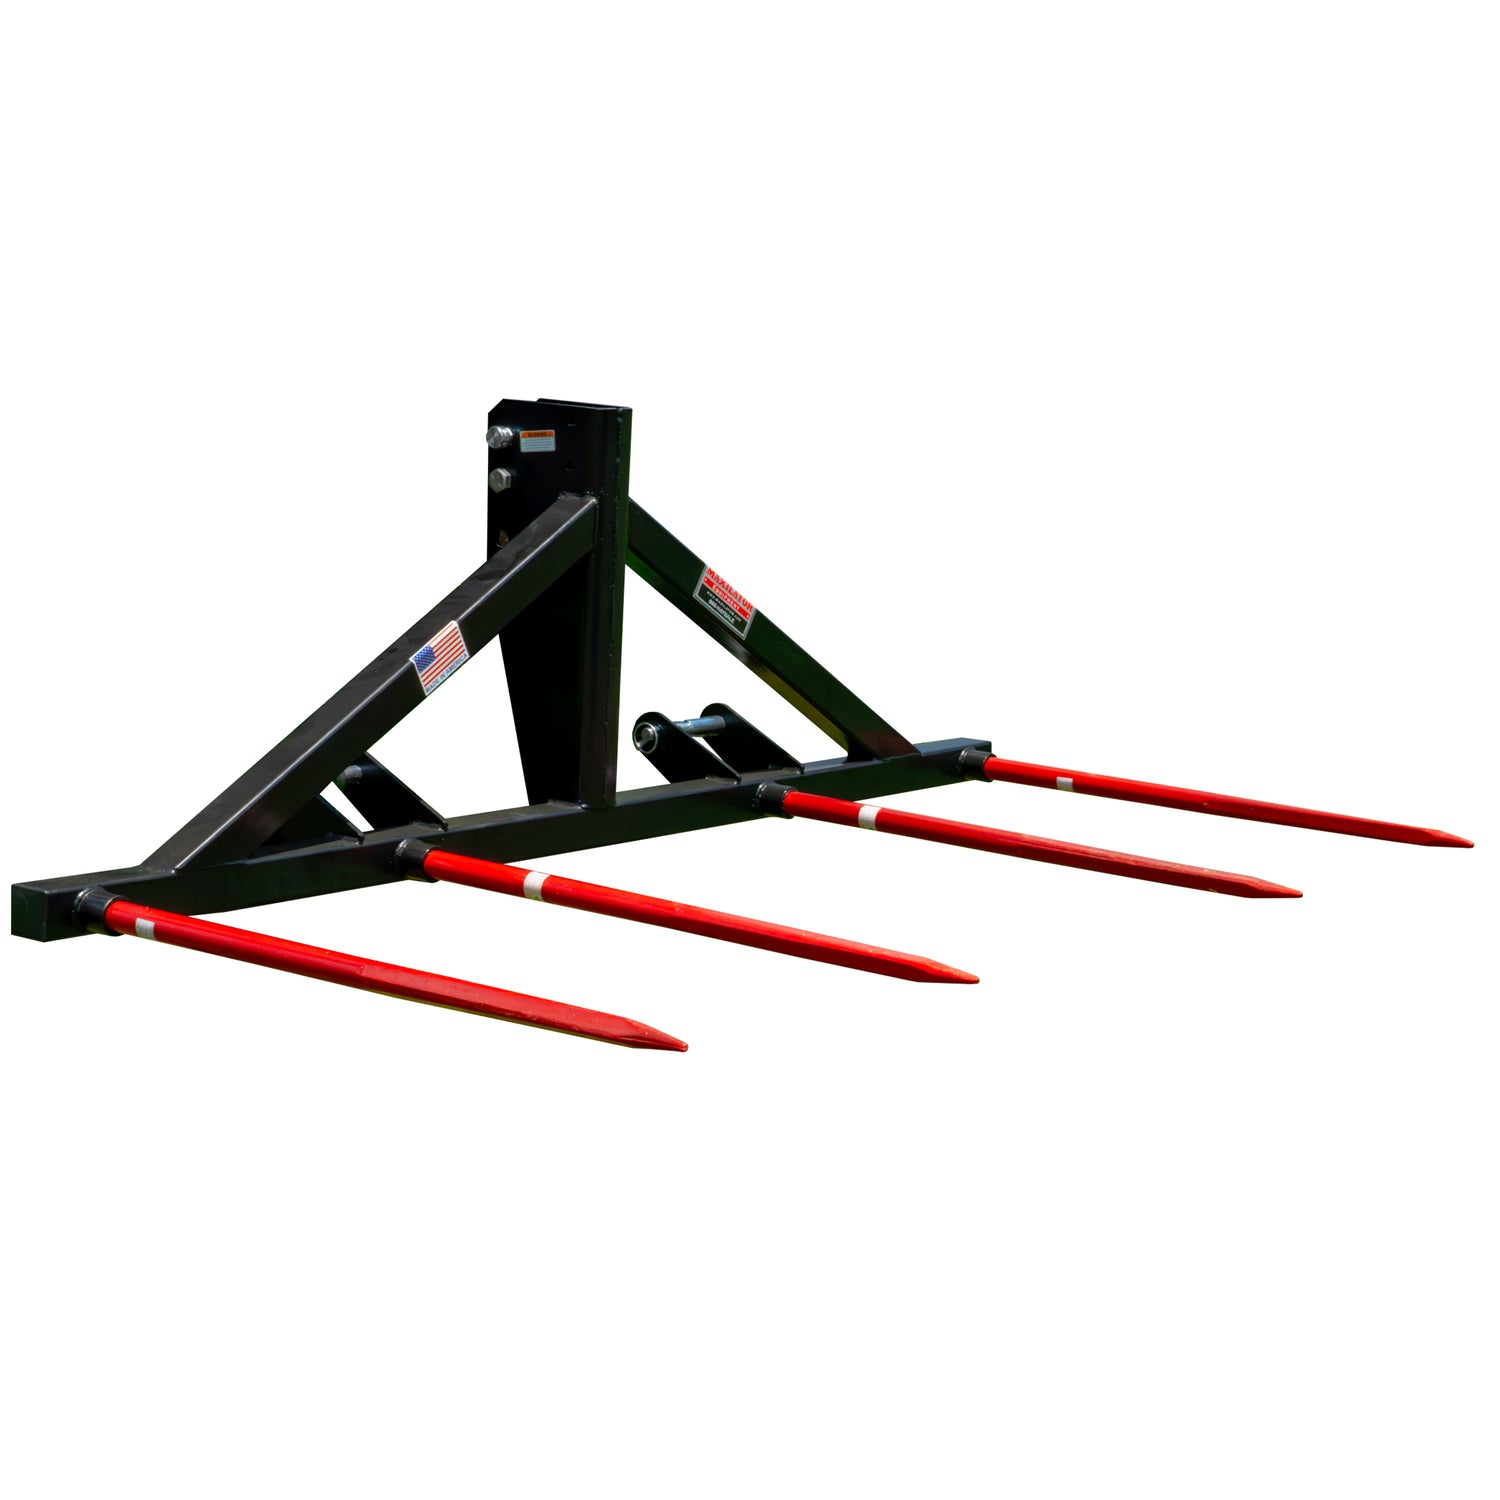 3-Point Rear Hitch Skid Steer Kit with (4) 39&quot; Spears - MHSK39-3PH-SS